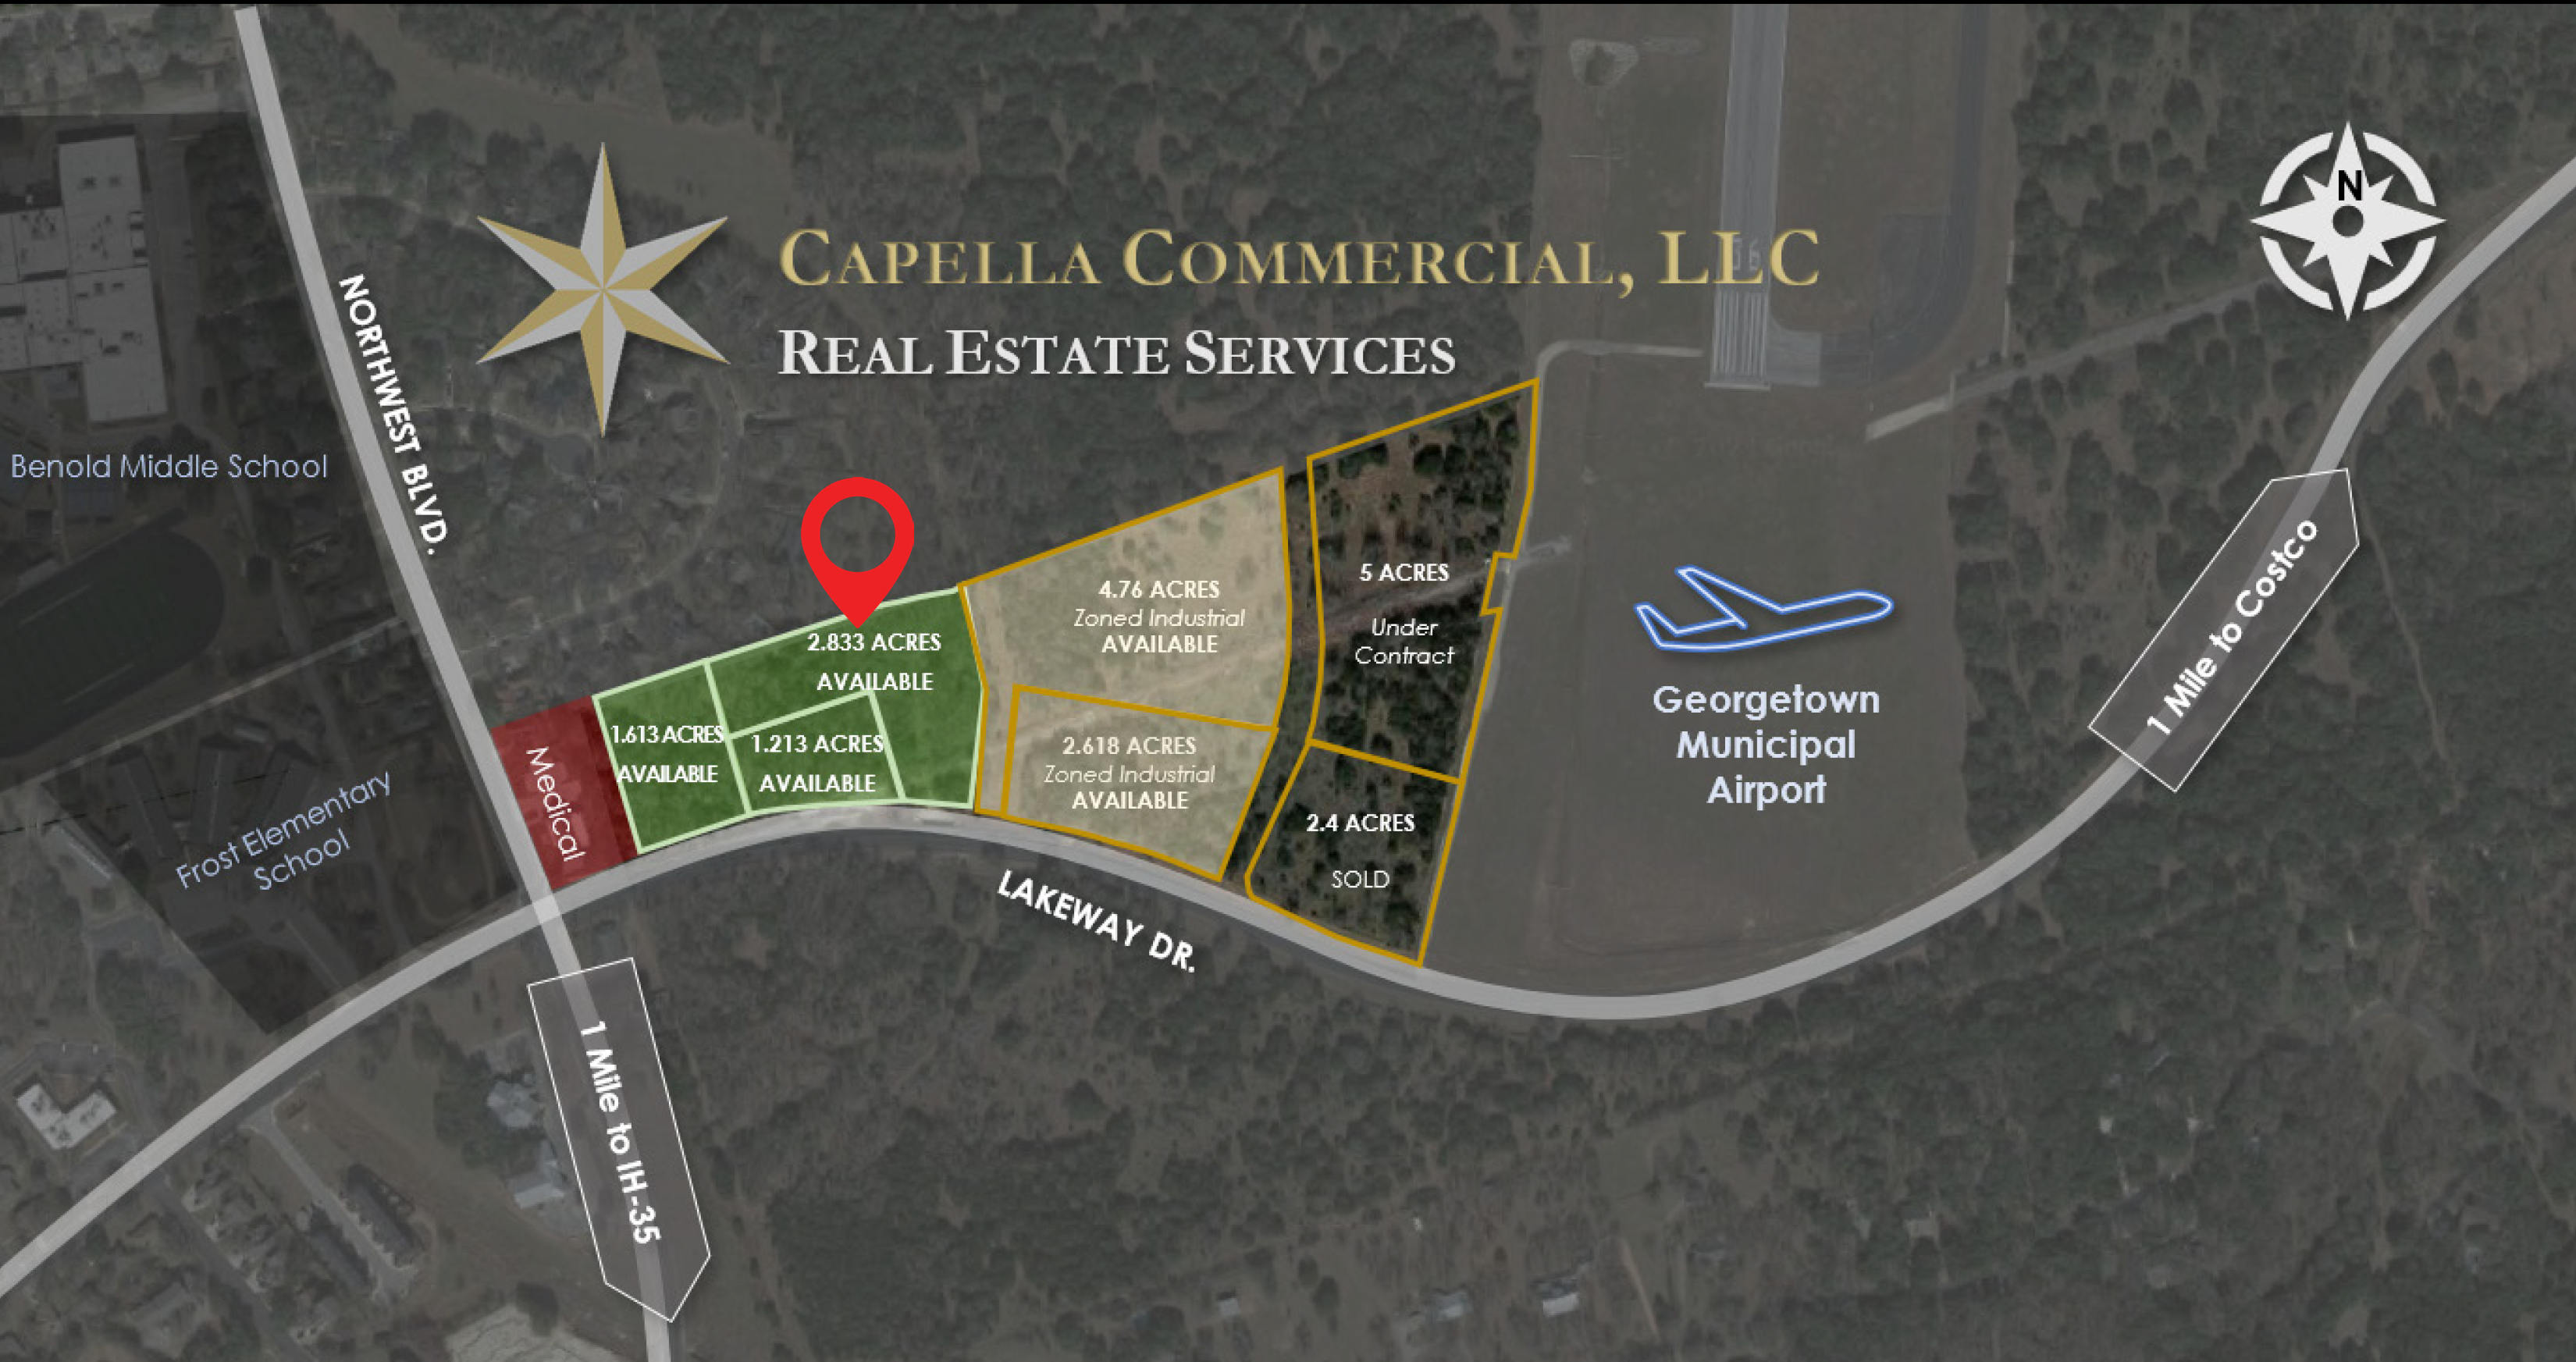 2.8 Acre Commercial Opportunity in Georgetown